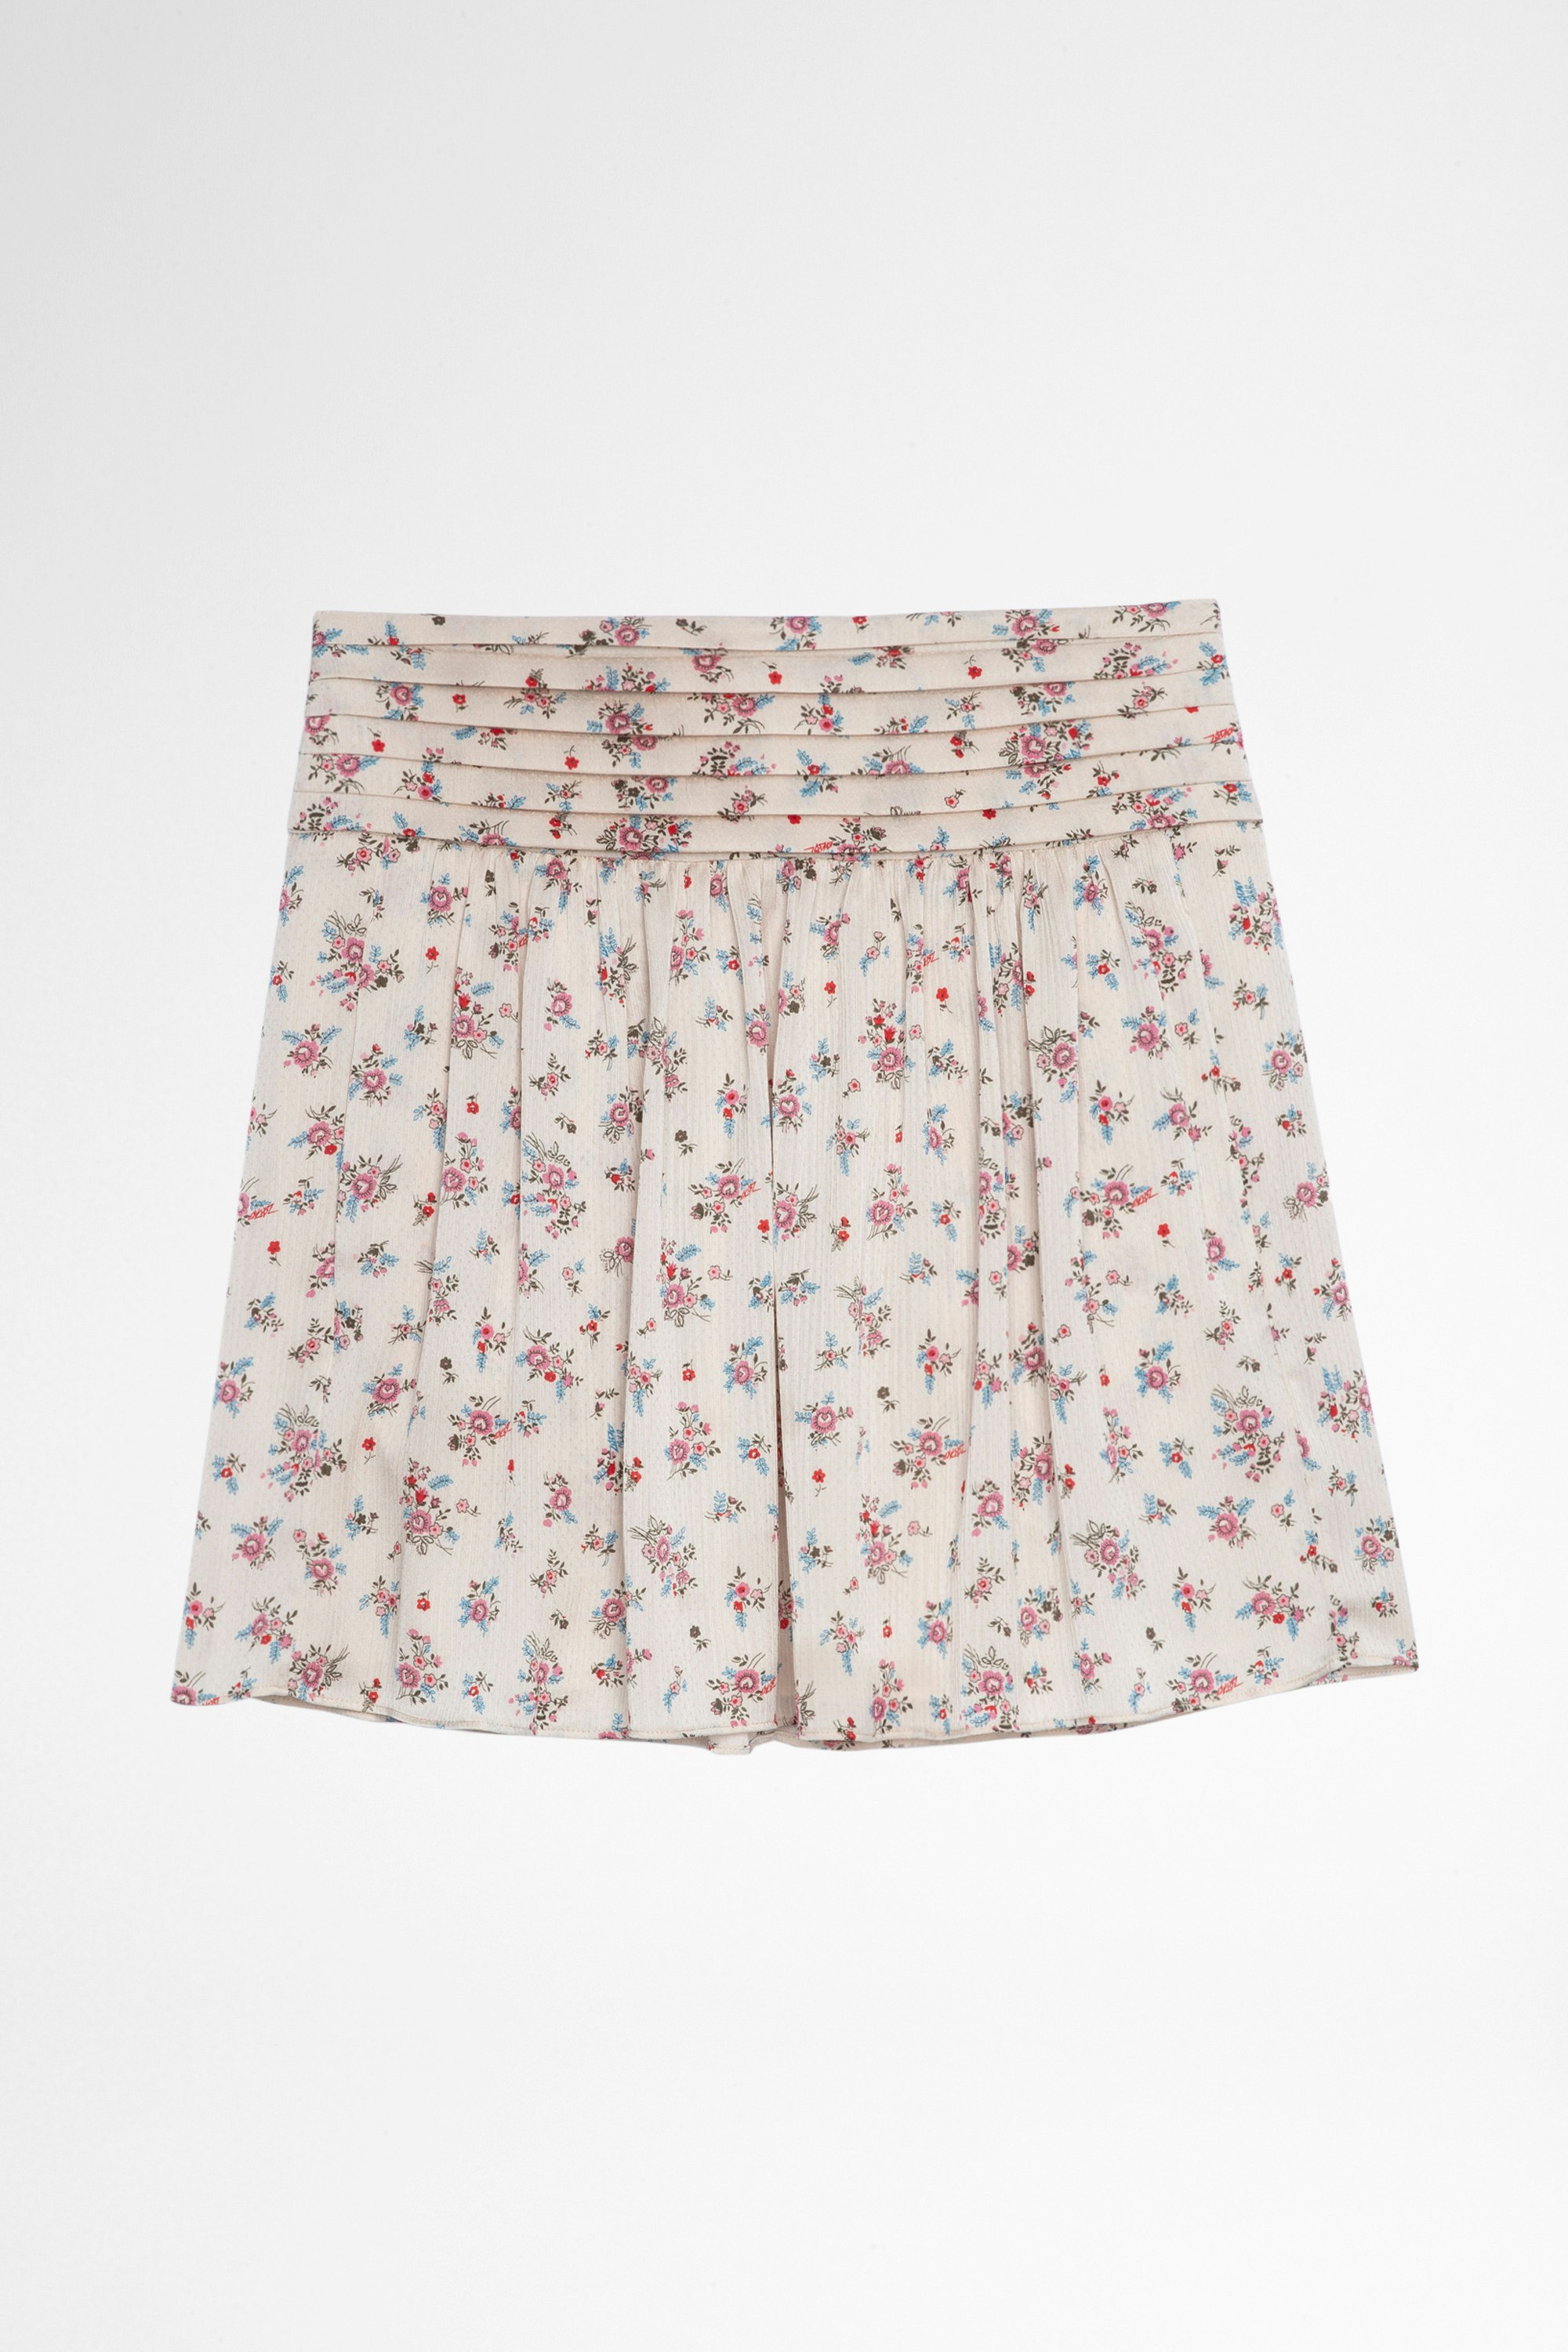 Javala スカート Women's short skirt in white with floral print